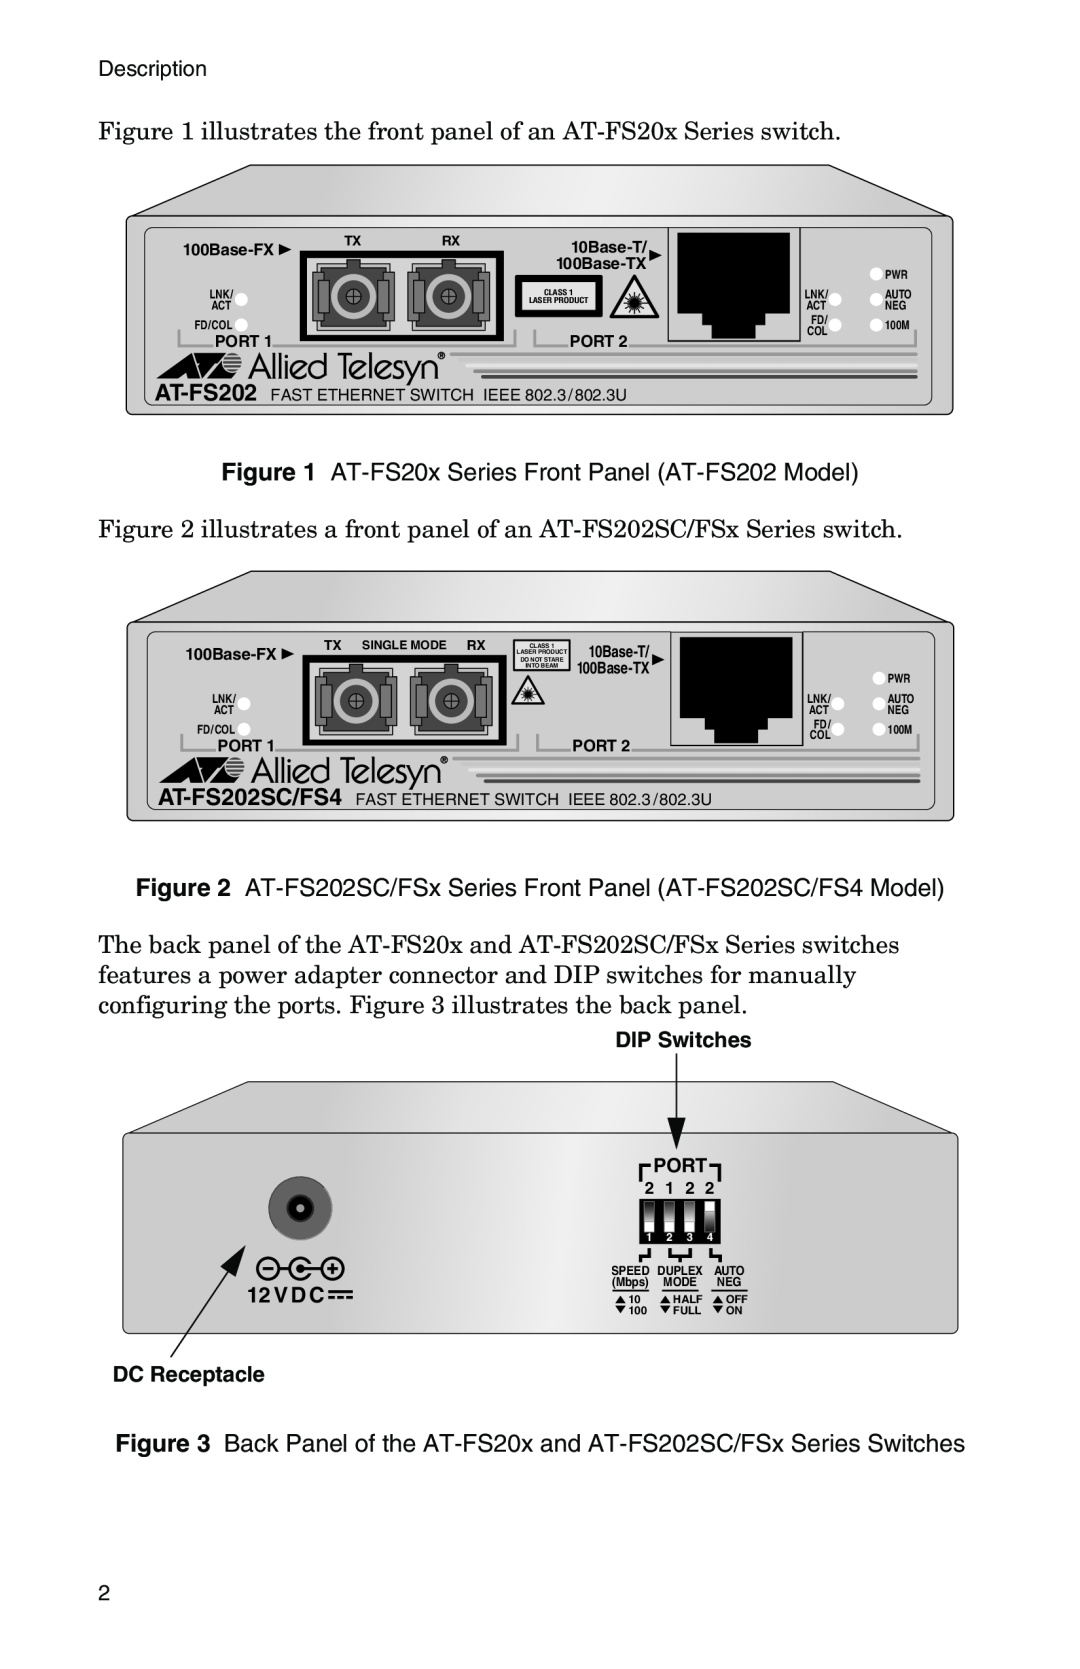 IBM AT-FS202SC/FS3, AT-FS202SC/FS2, AT-FS202SC/FS4, AT-FS202SC/FS1 illustrates the front panel of an AT-FS20x Series switch 